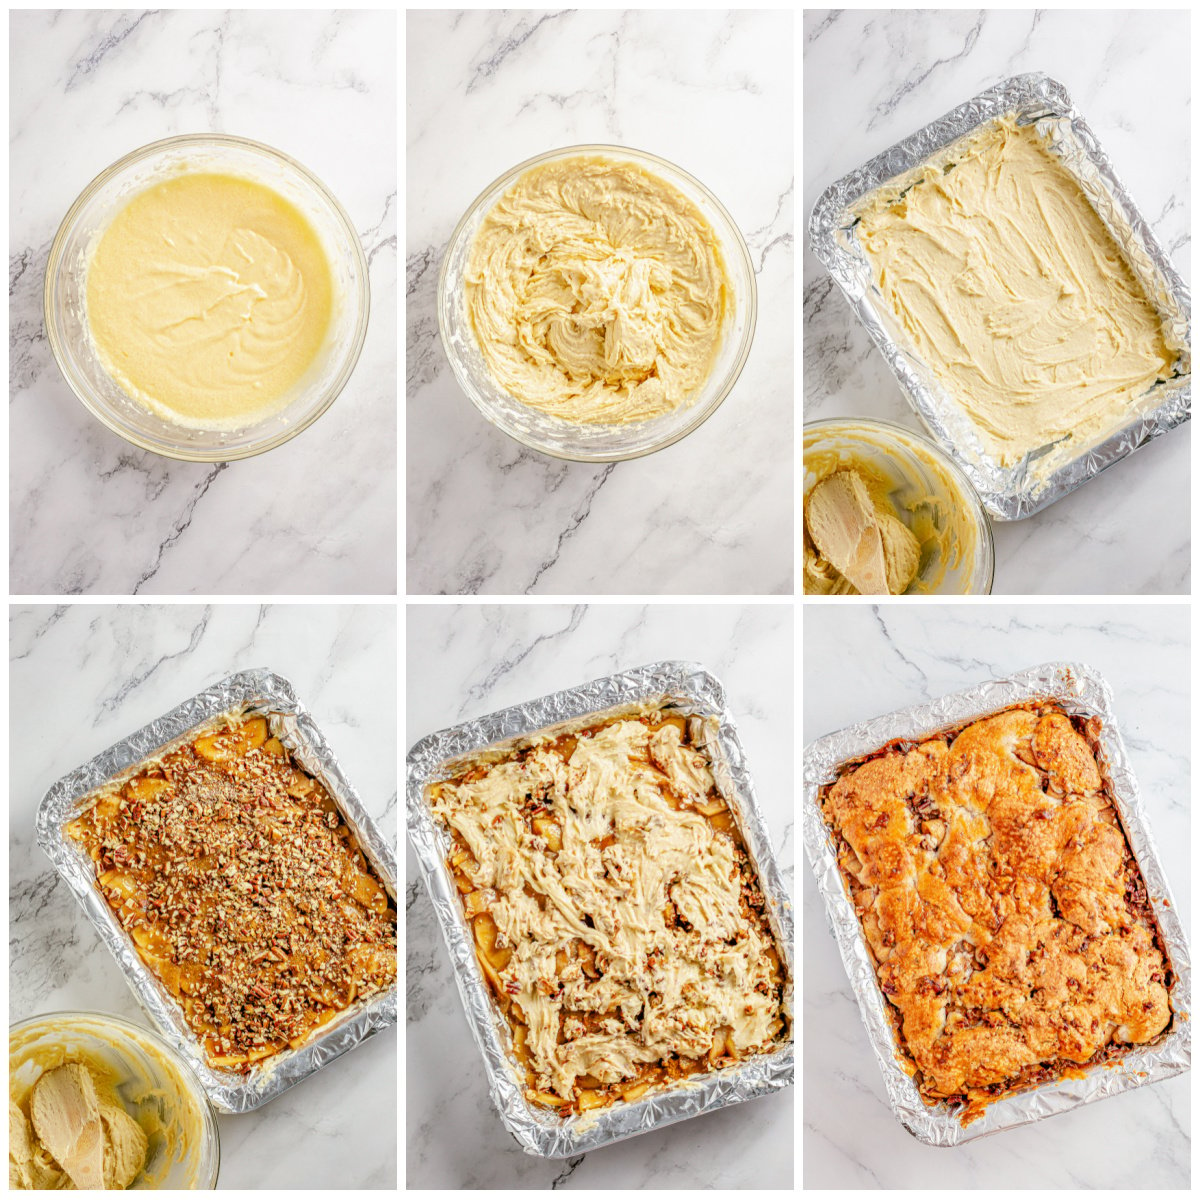 Step by step photos on how to make Apple Pie Bars.